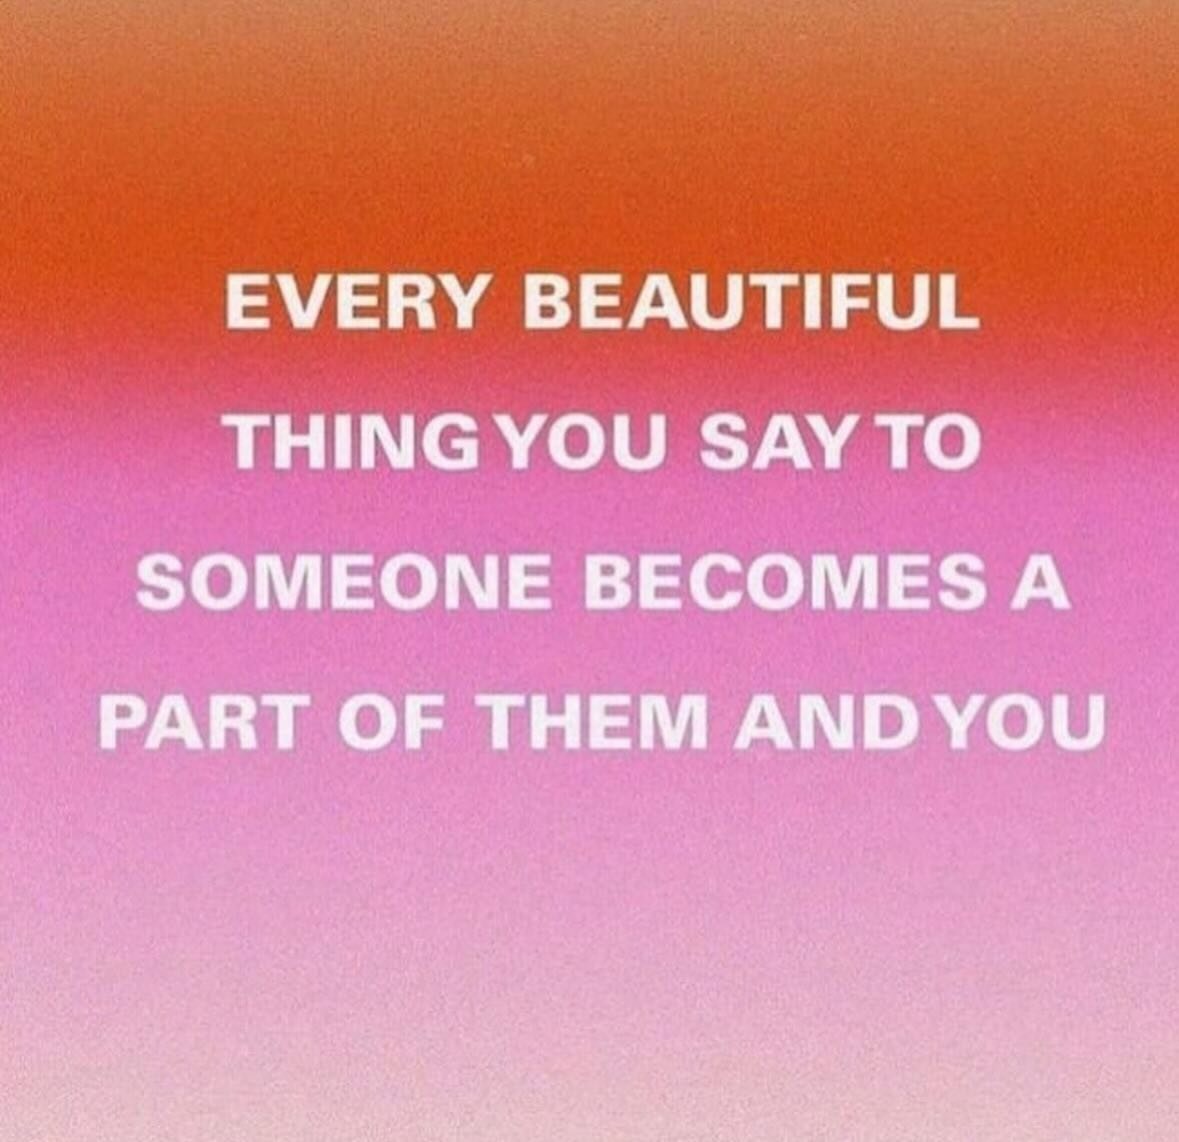 ONE OF MY FAVES 🩷
And I really think it&rsquo;s true too. Think about it. And then see what happens when you put it into action.

Listen to what people have to say. Try to see the world through another lens for a change. Say something kind. Make som